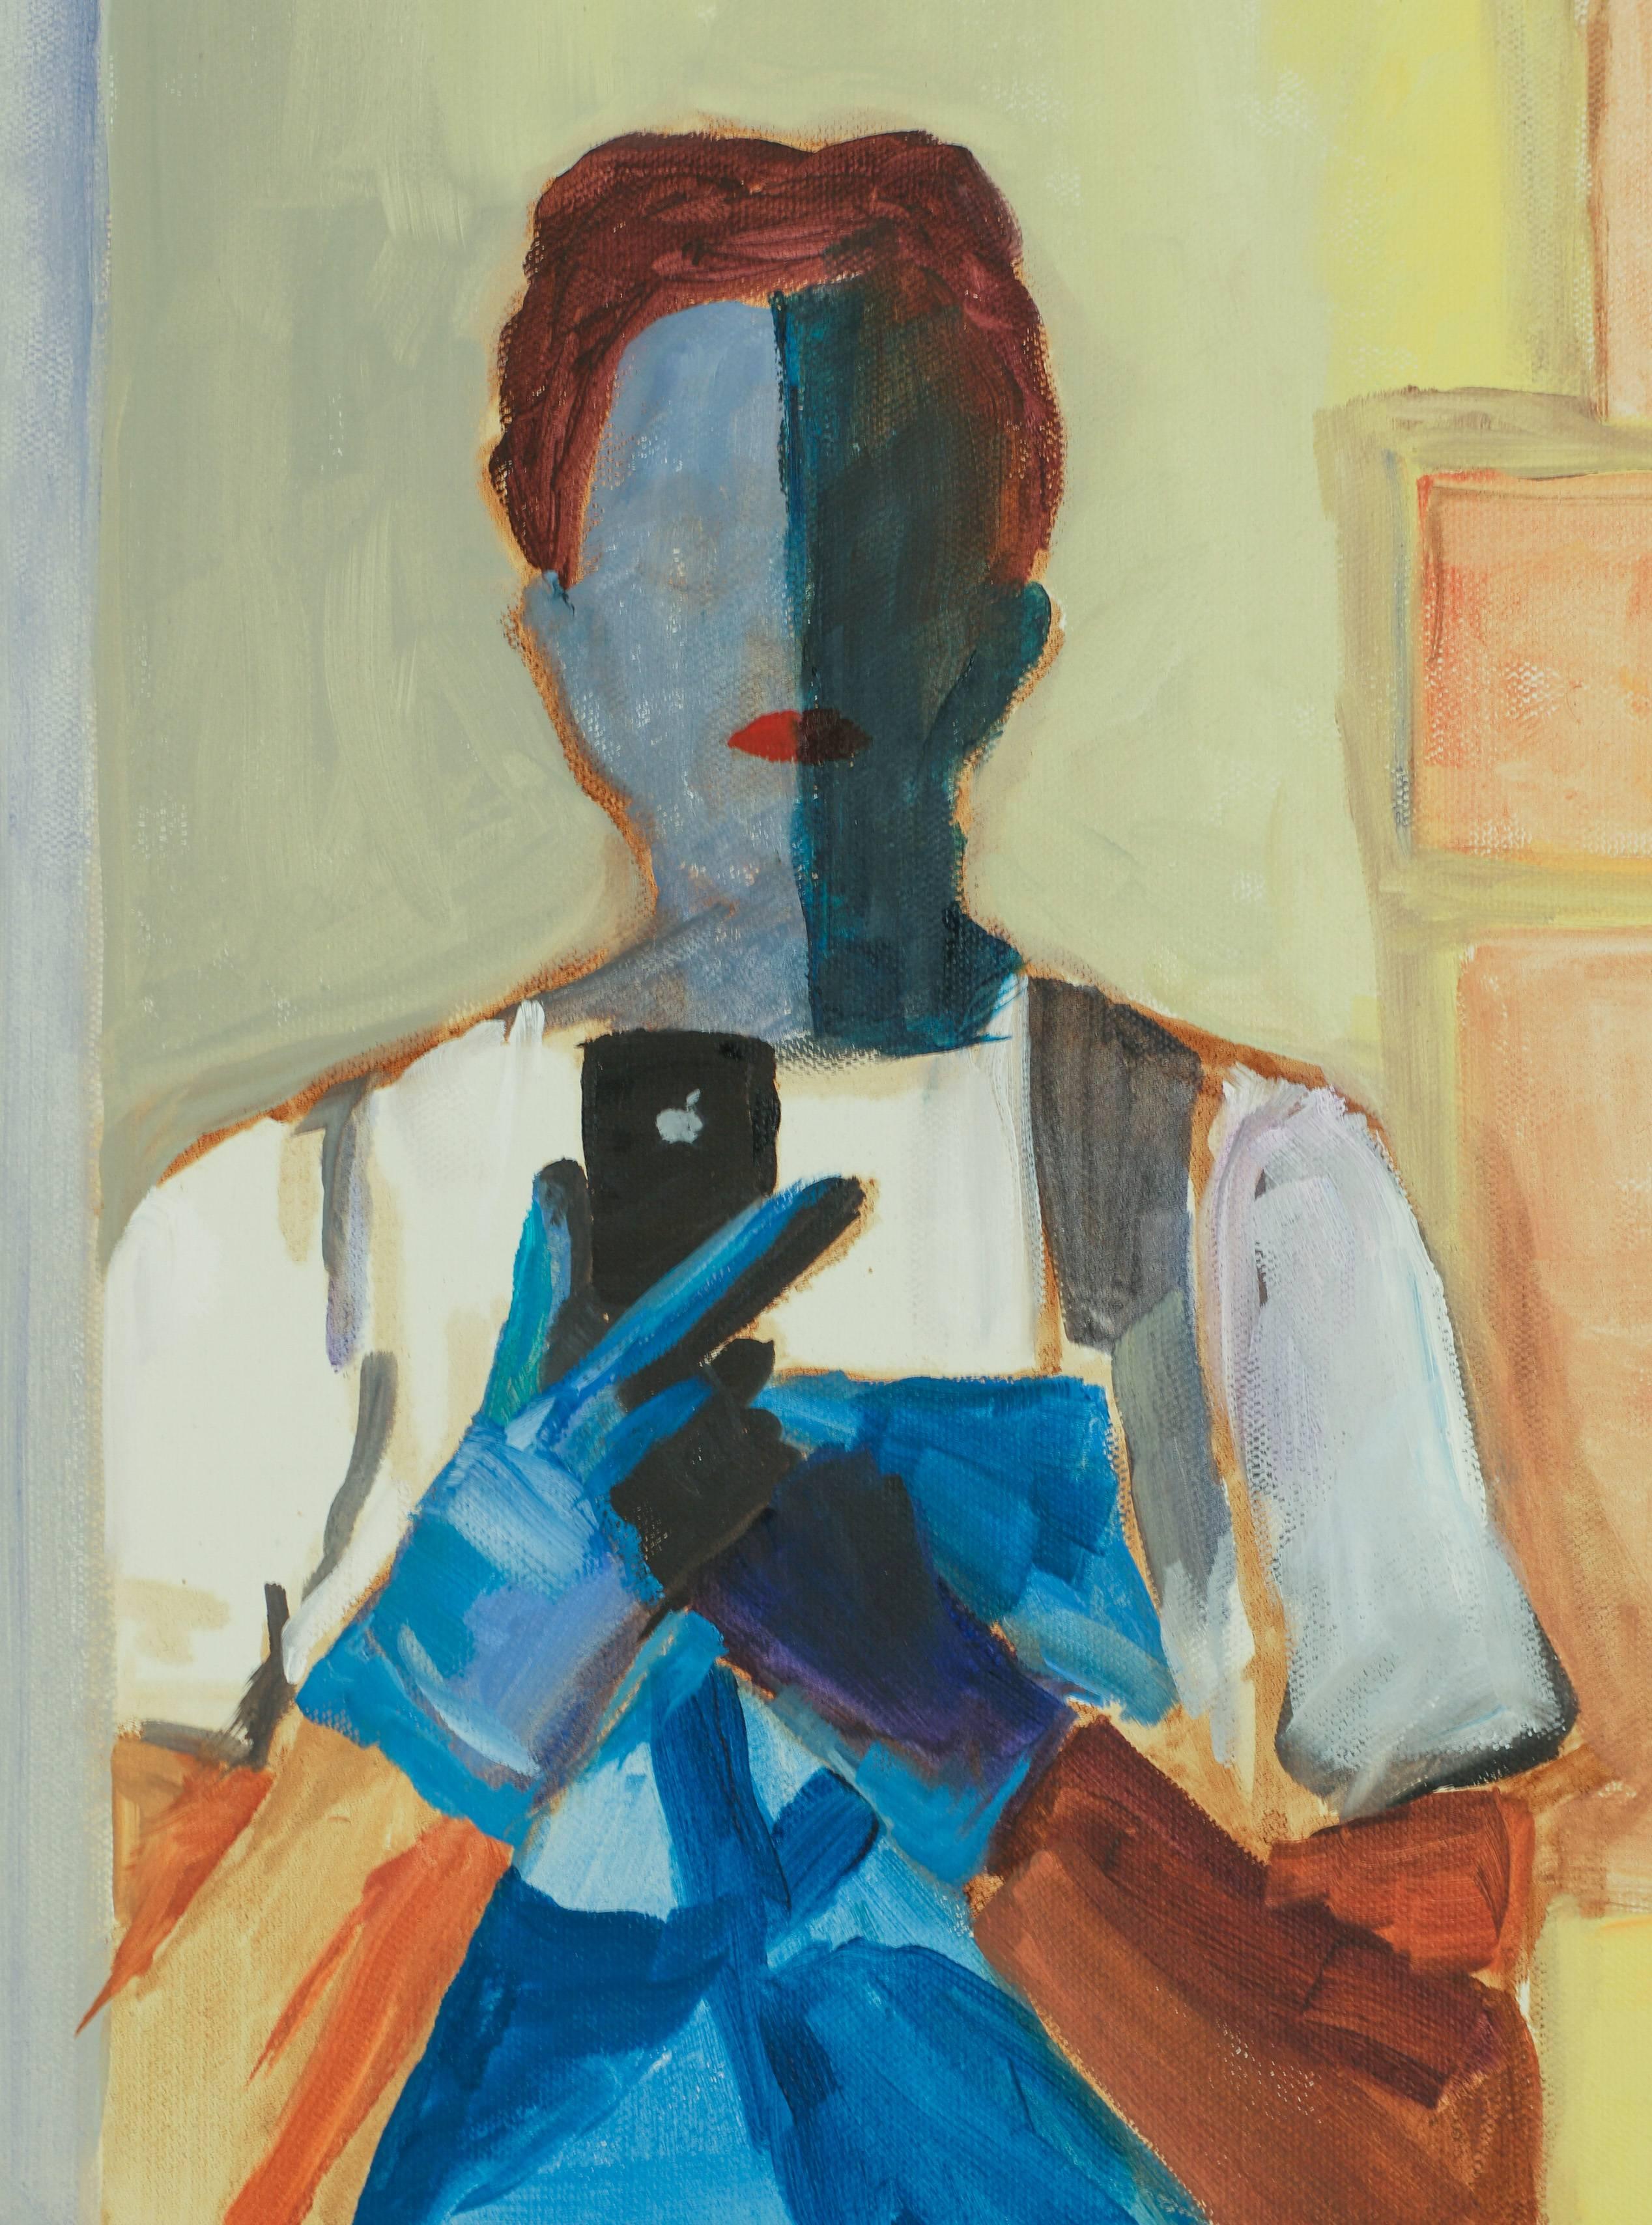 Portrait of the Artist with Cellphone - Painting by Rachel Newman